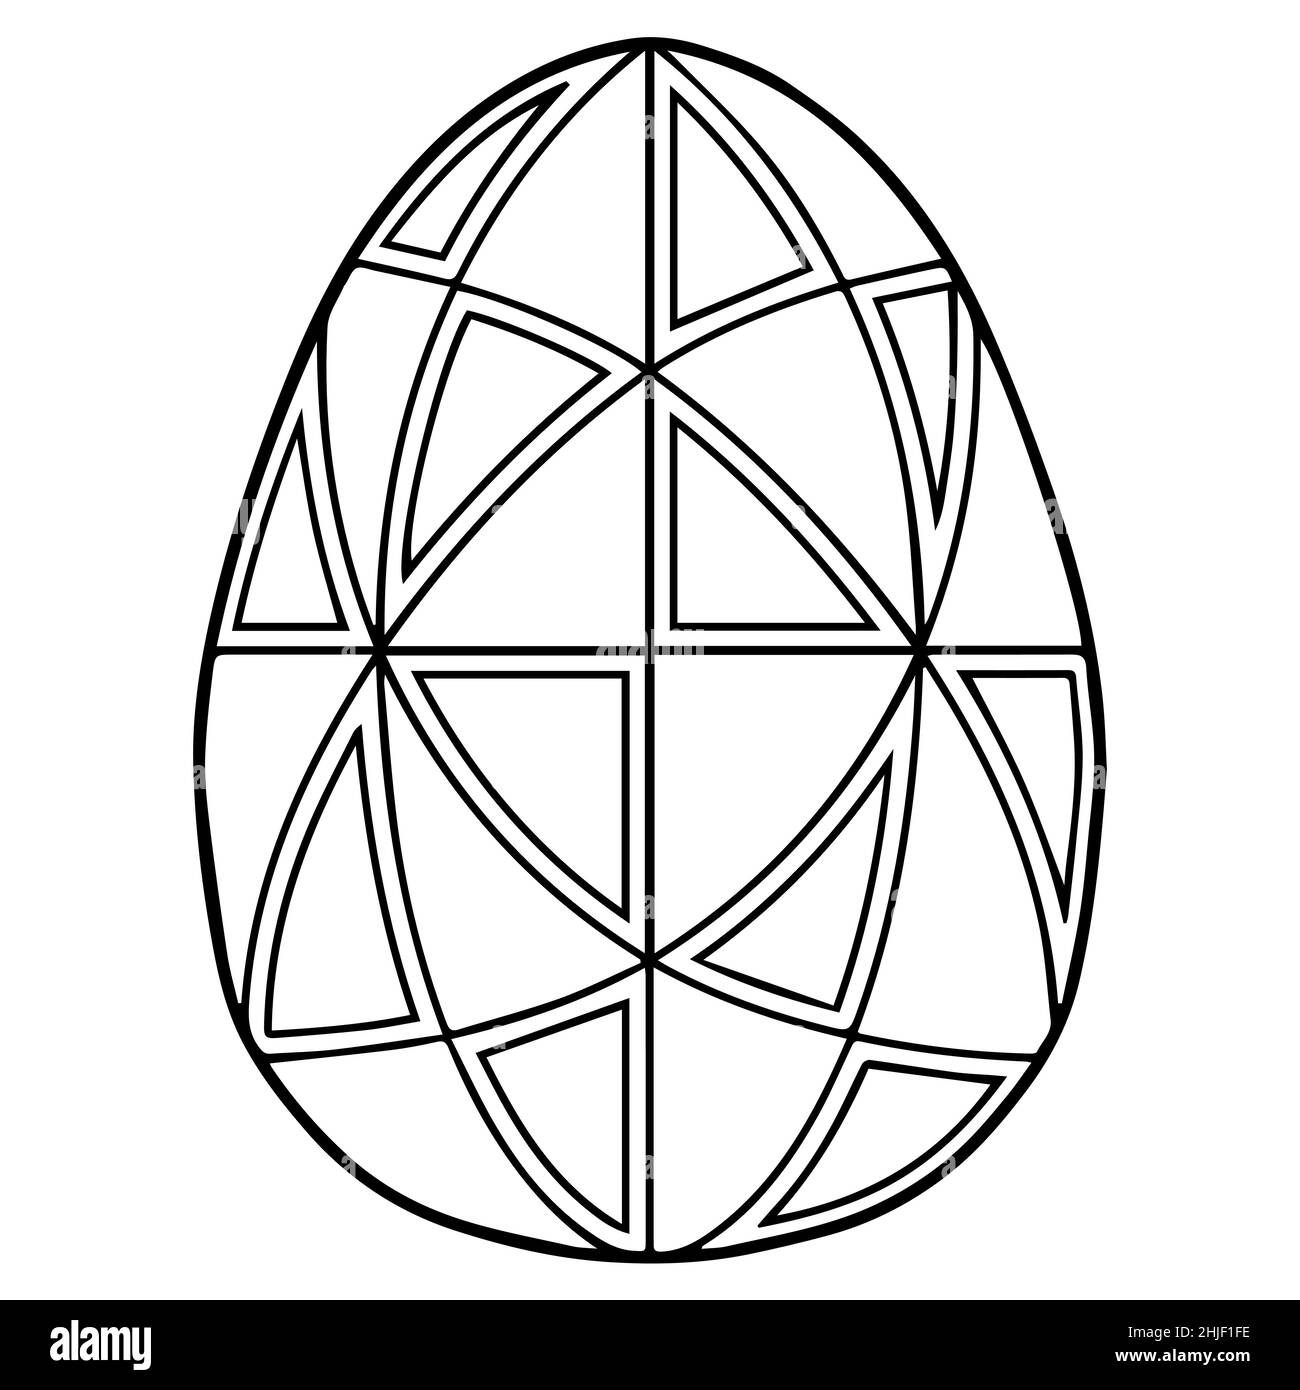 Adult coloring Black and White Stock Photos & Images - Alamy